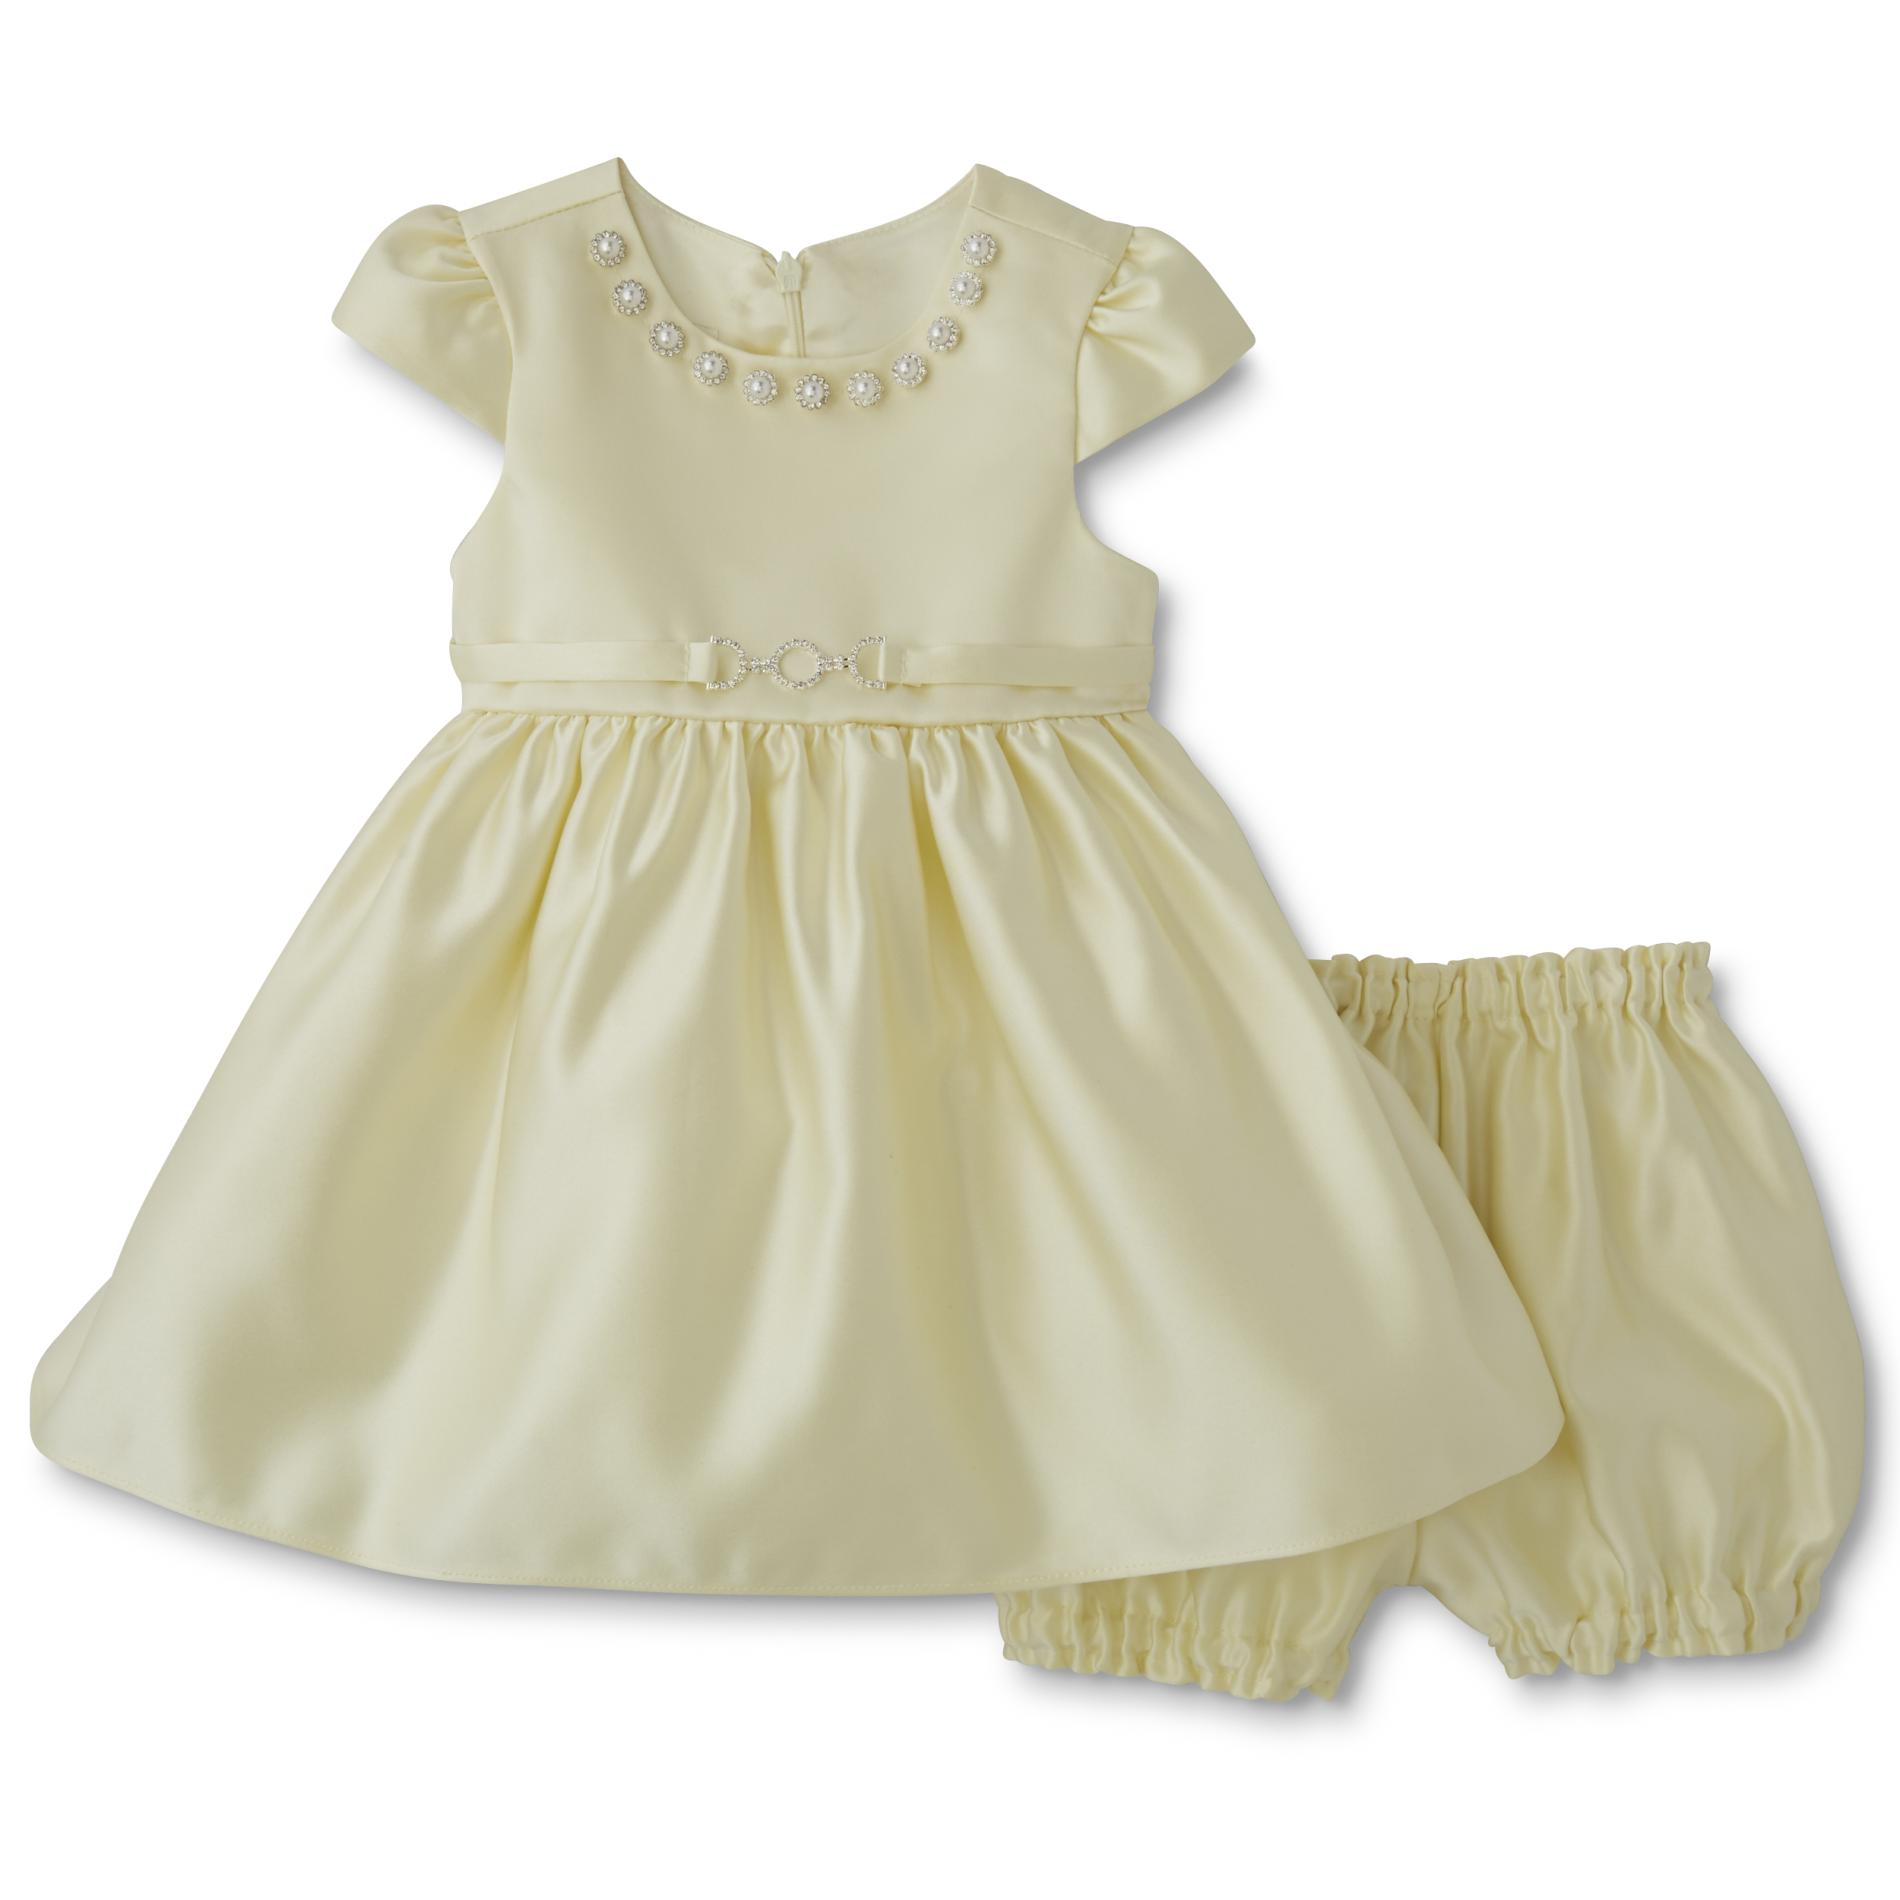 American Princess Infant & Toddler Girls' Party Dress